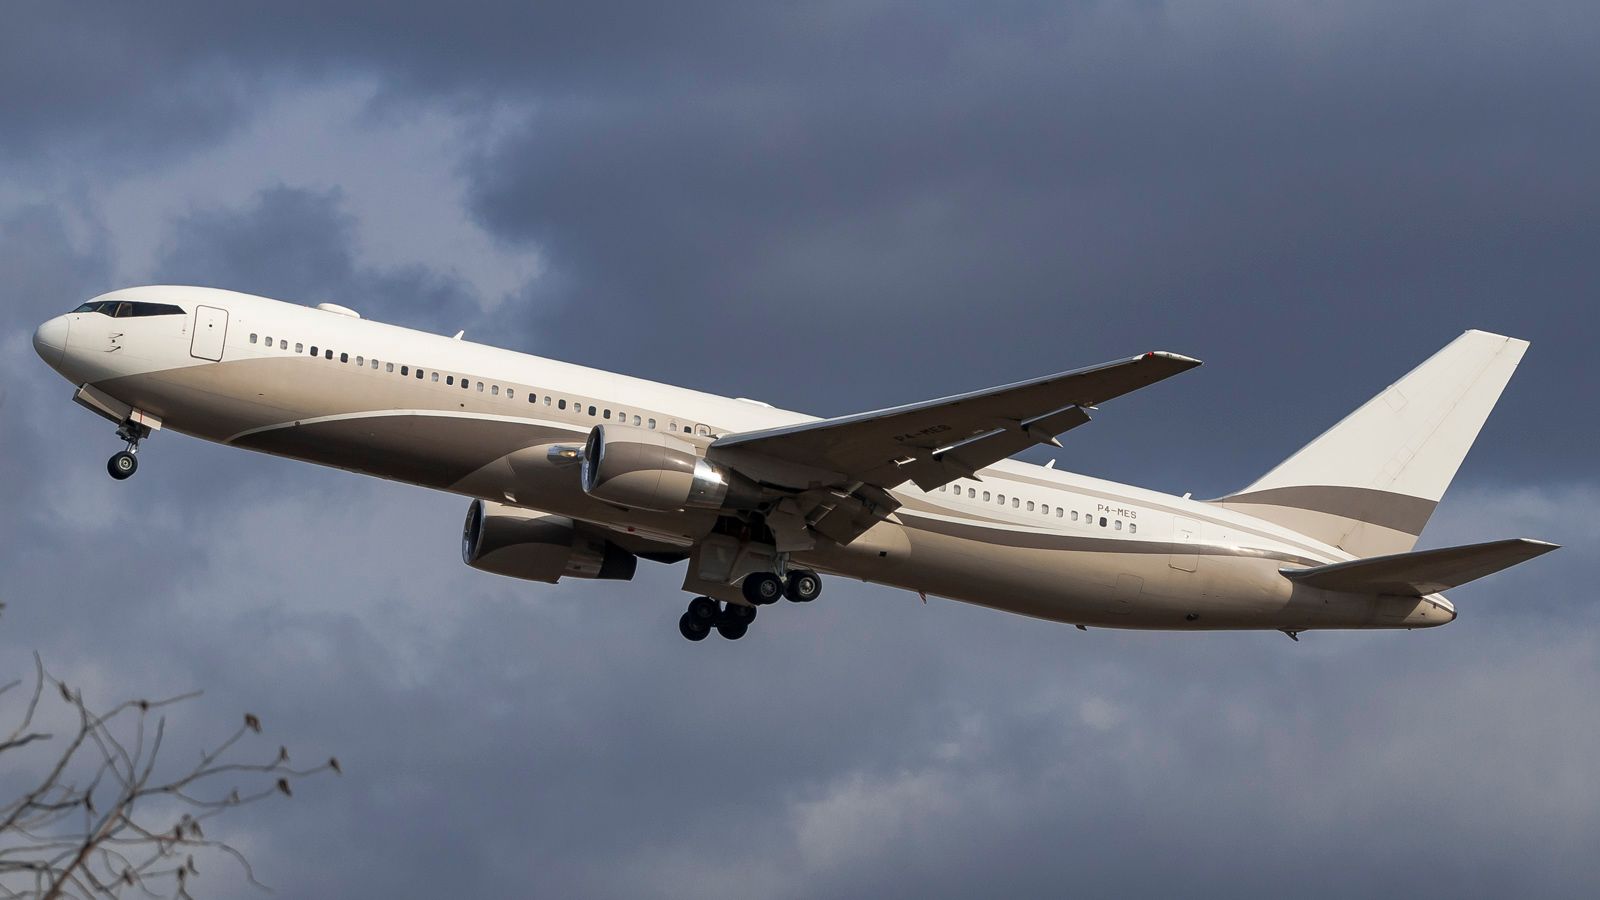 Roman Abramovich's private Boeing 767-300ER flying in the sky.